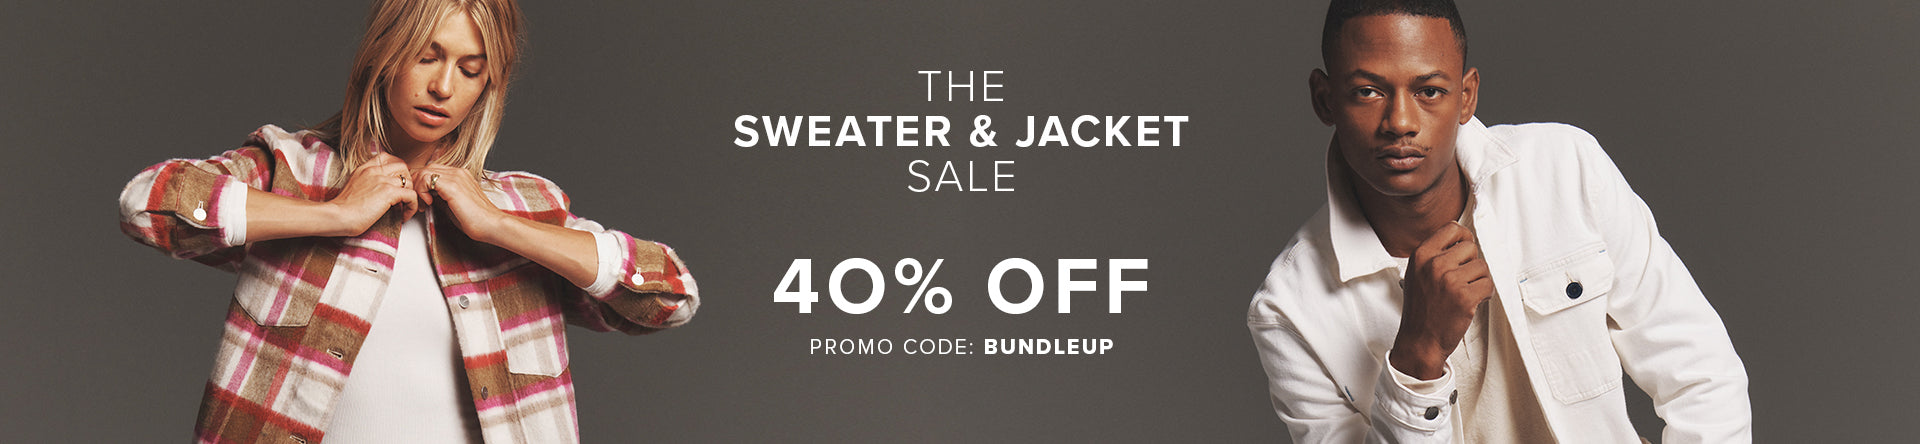 MEN / THE SWEATER & JACKET SALE's Collection Banner Image